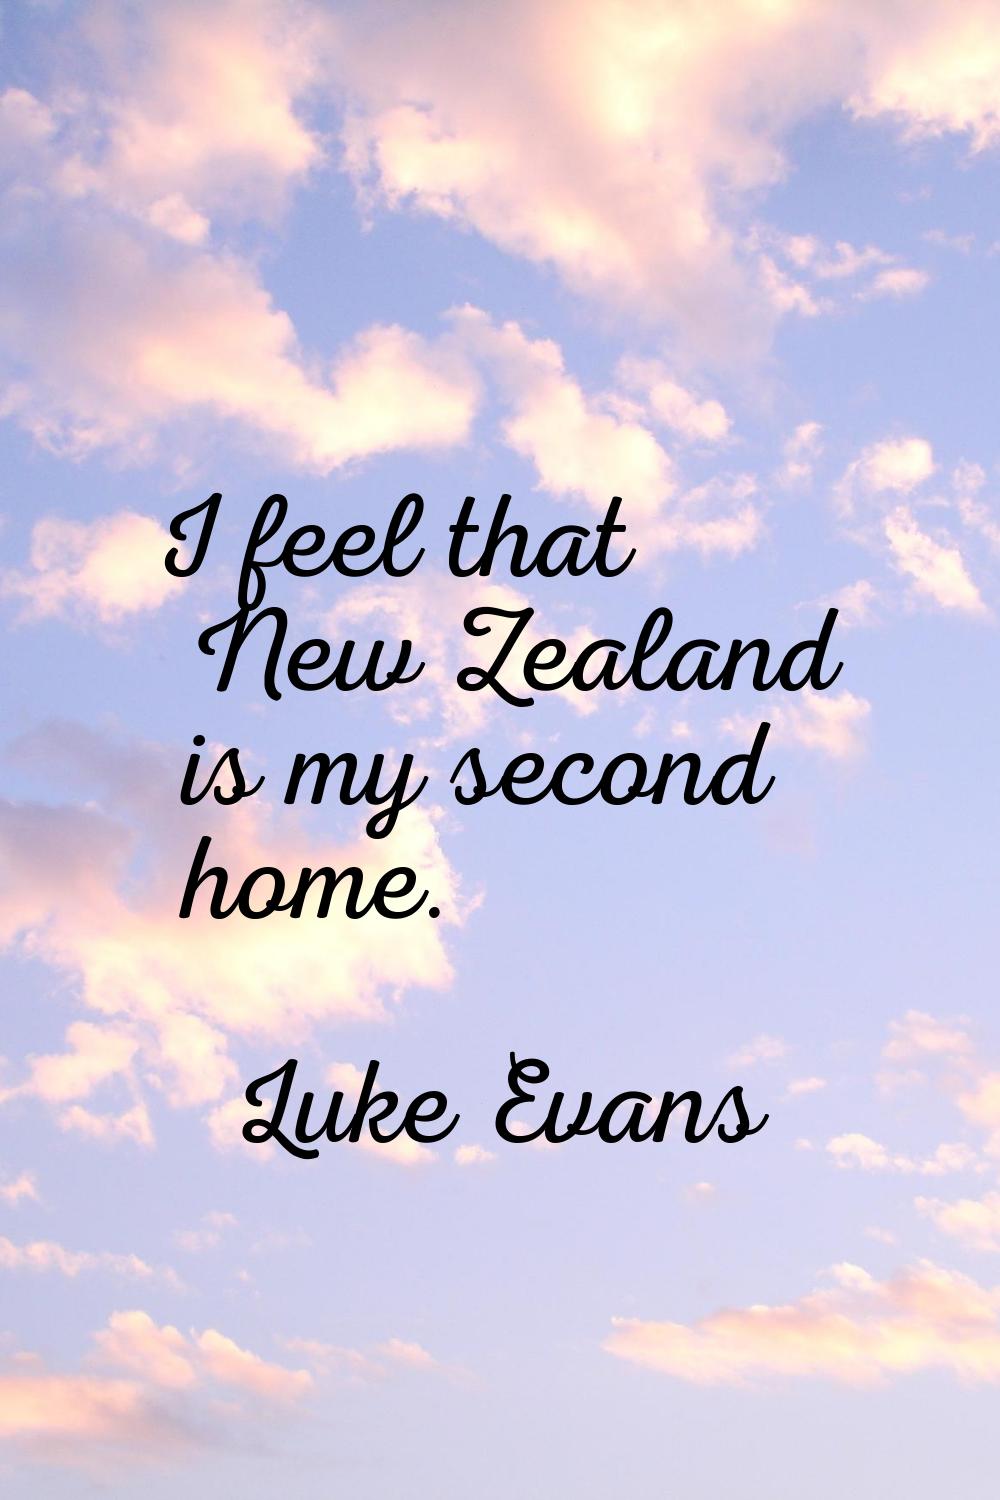 I feel that New Zealand is my second home.